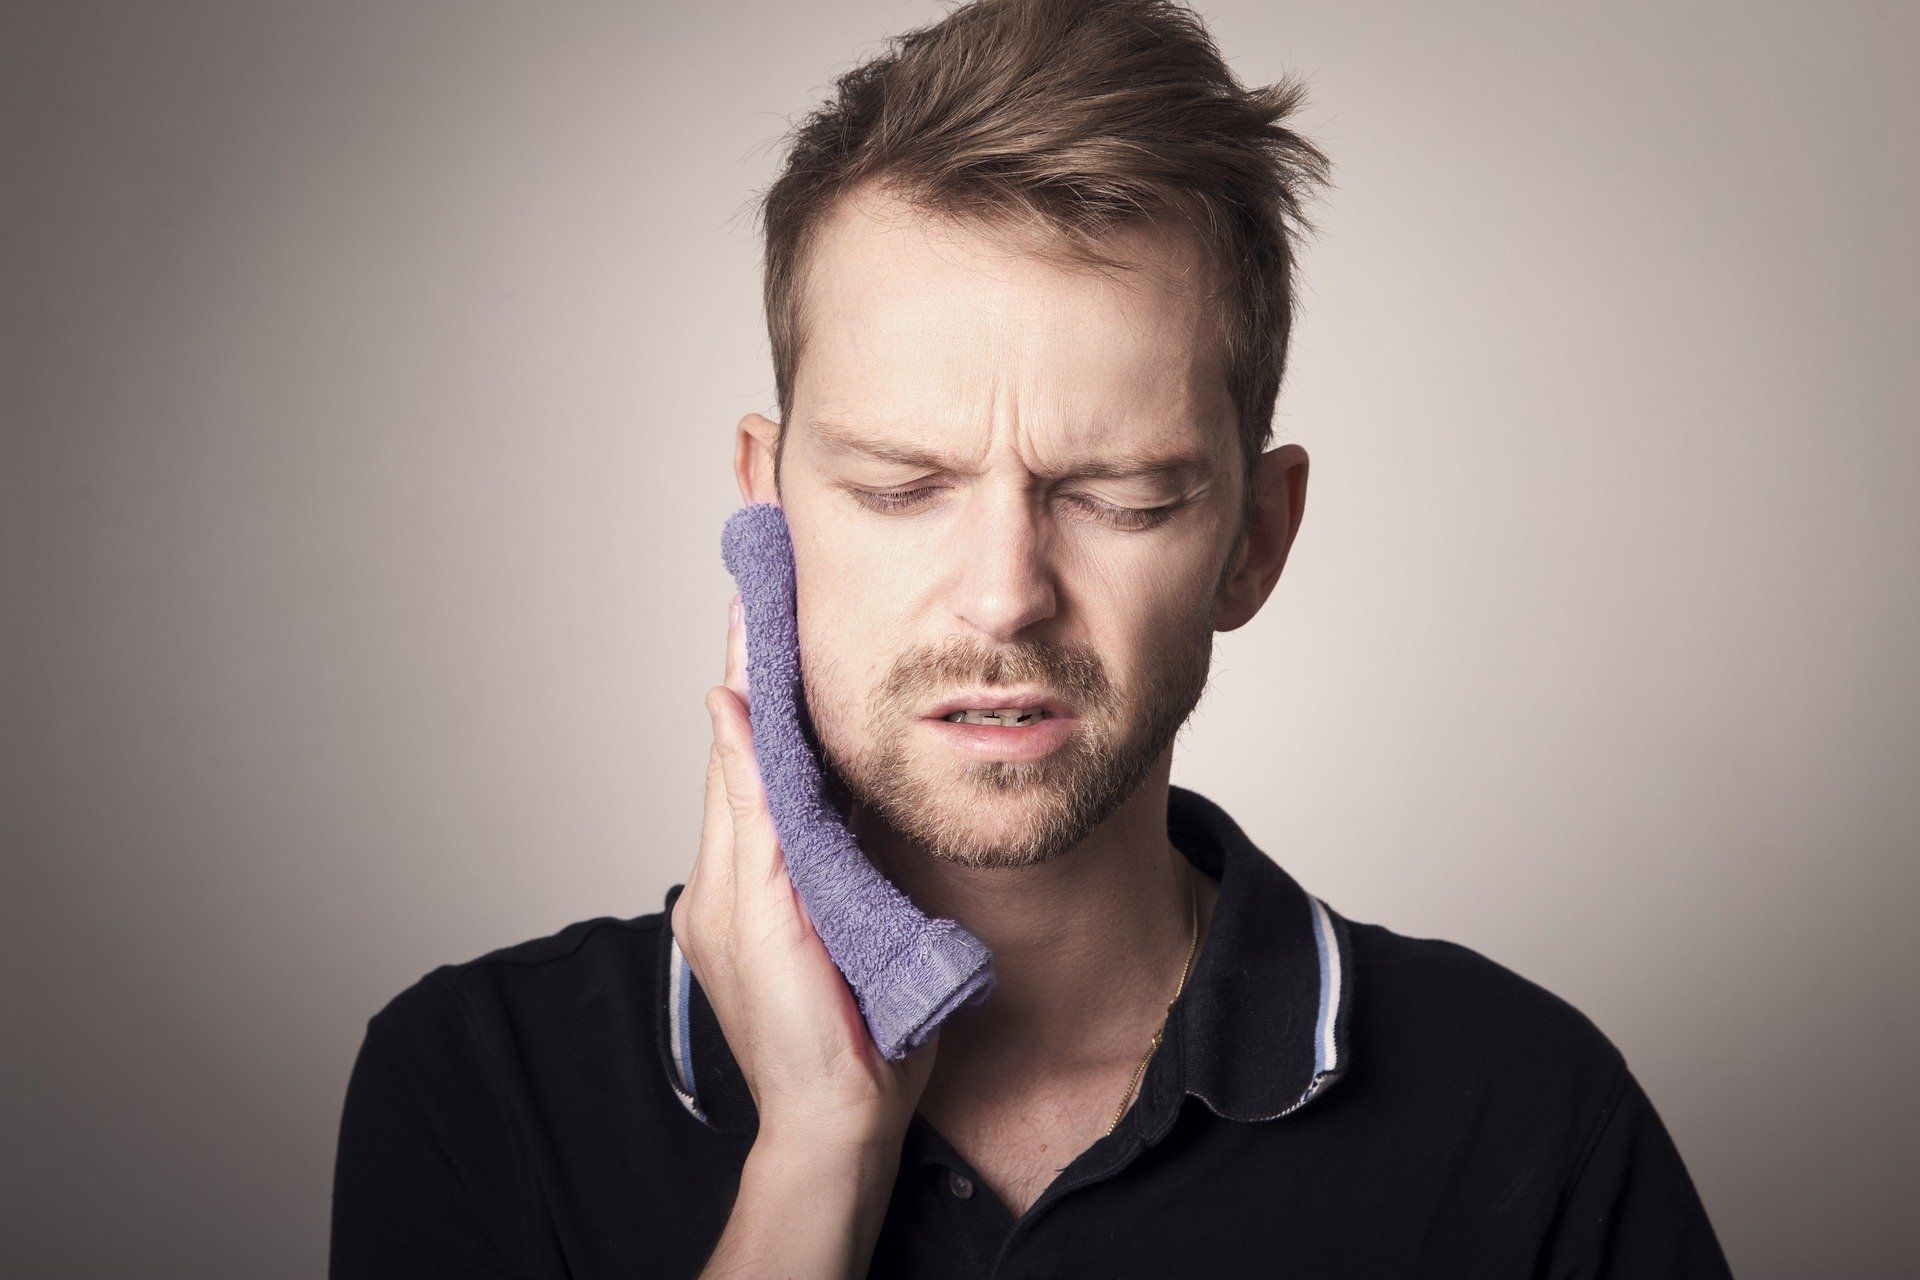 What To Expect When Getting Your Wisdom Tooth Removed